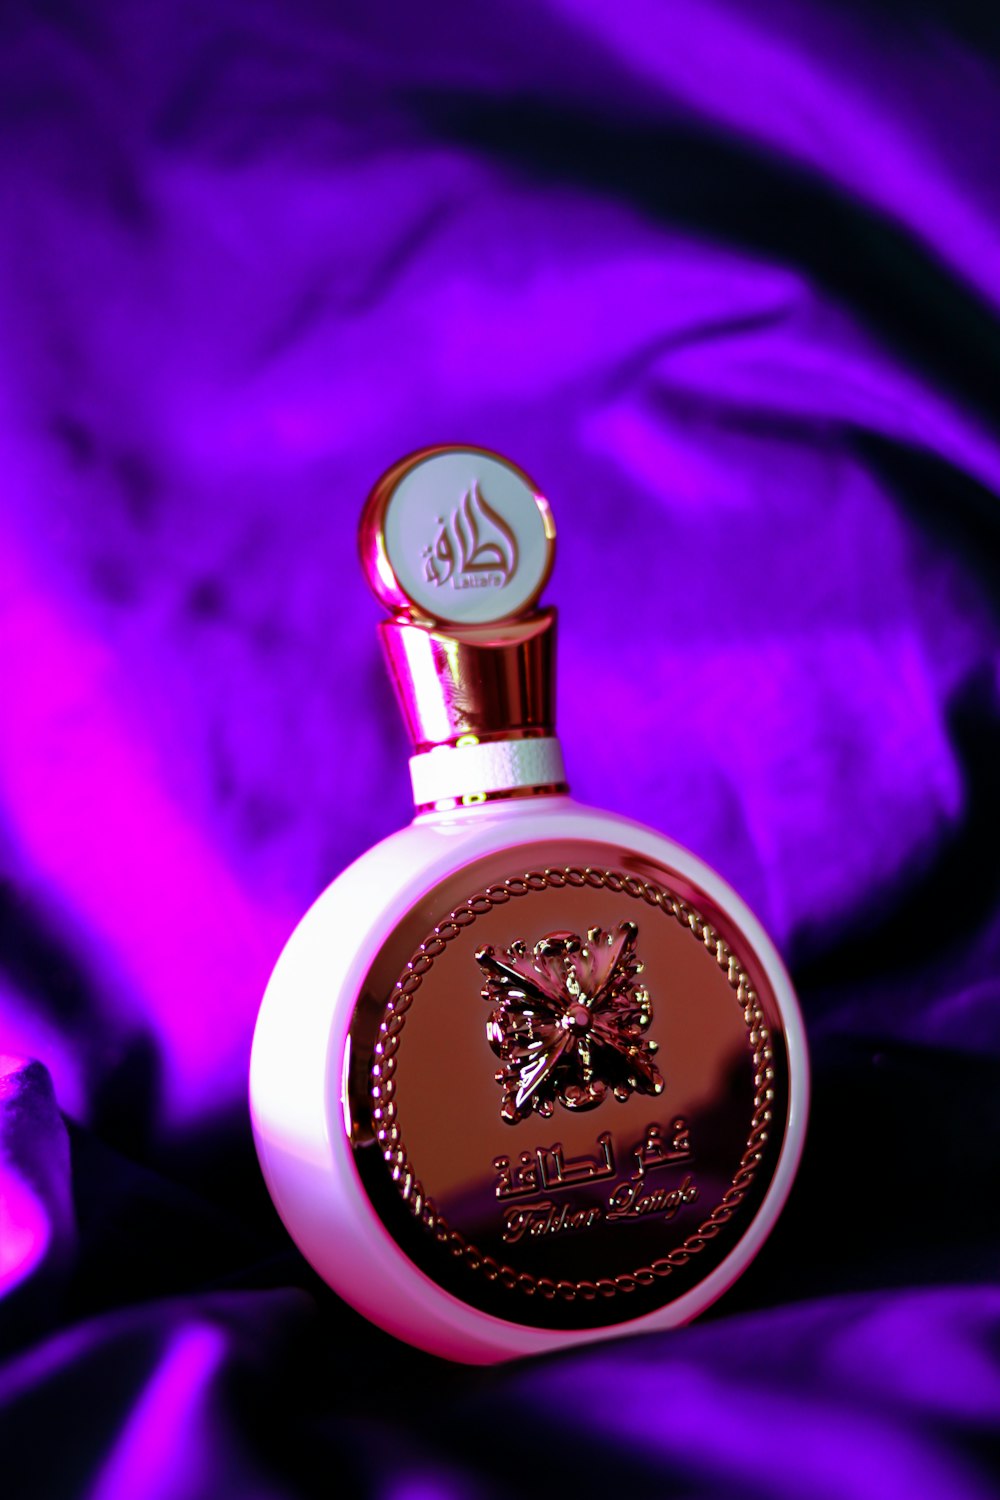 a bottle of perfume sitting on a purple cloth